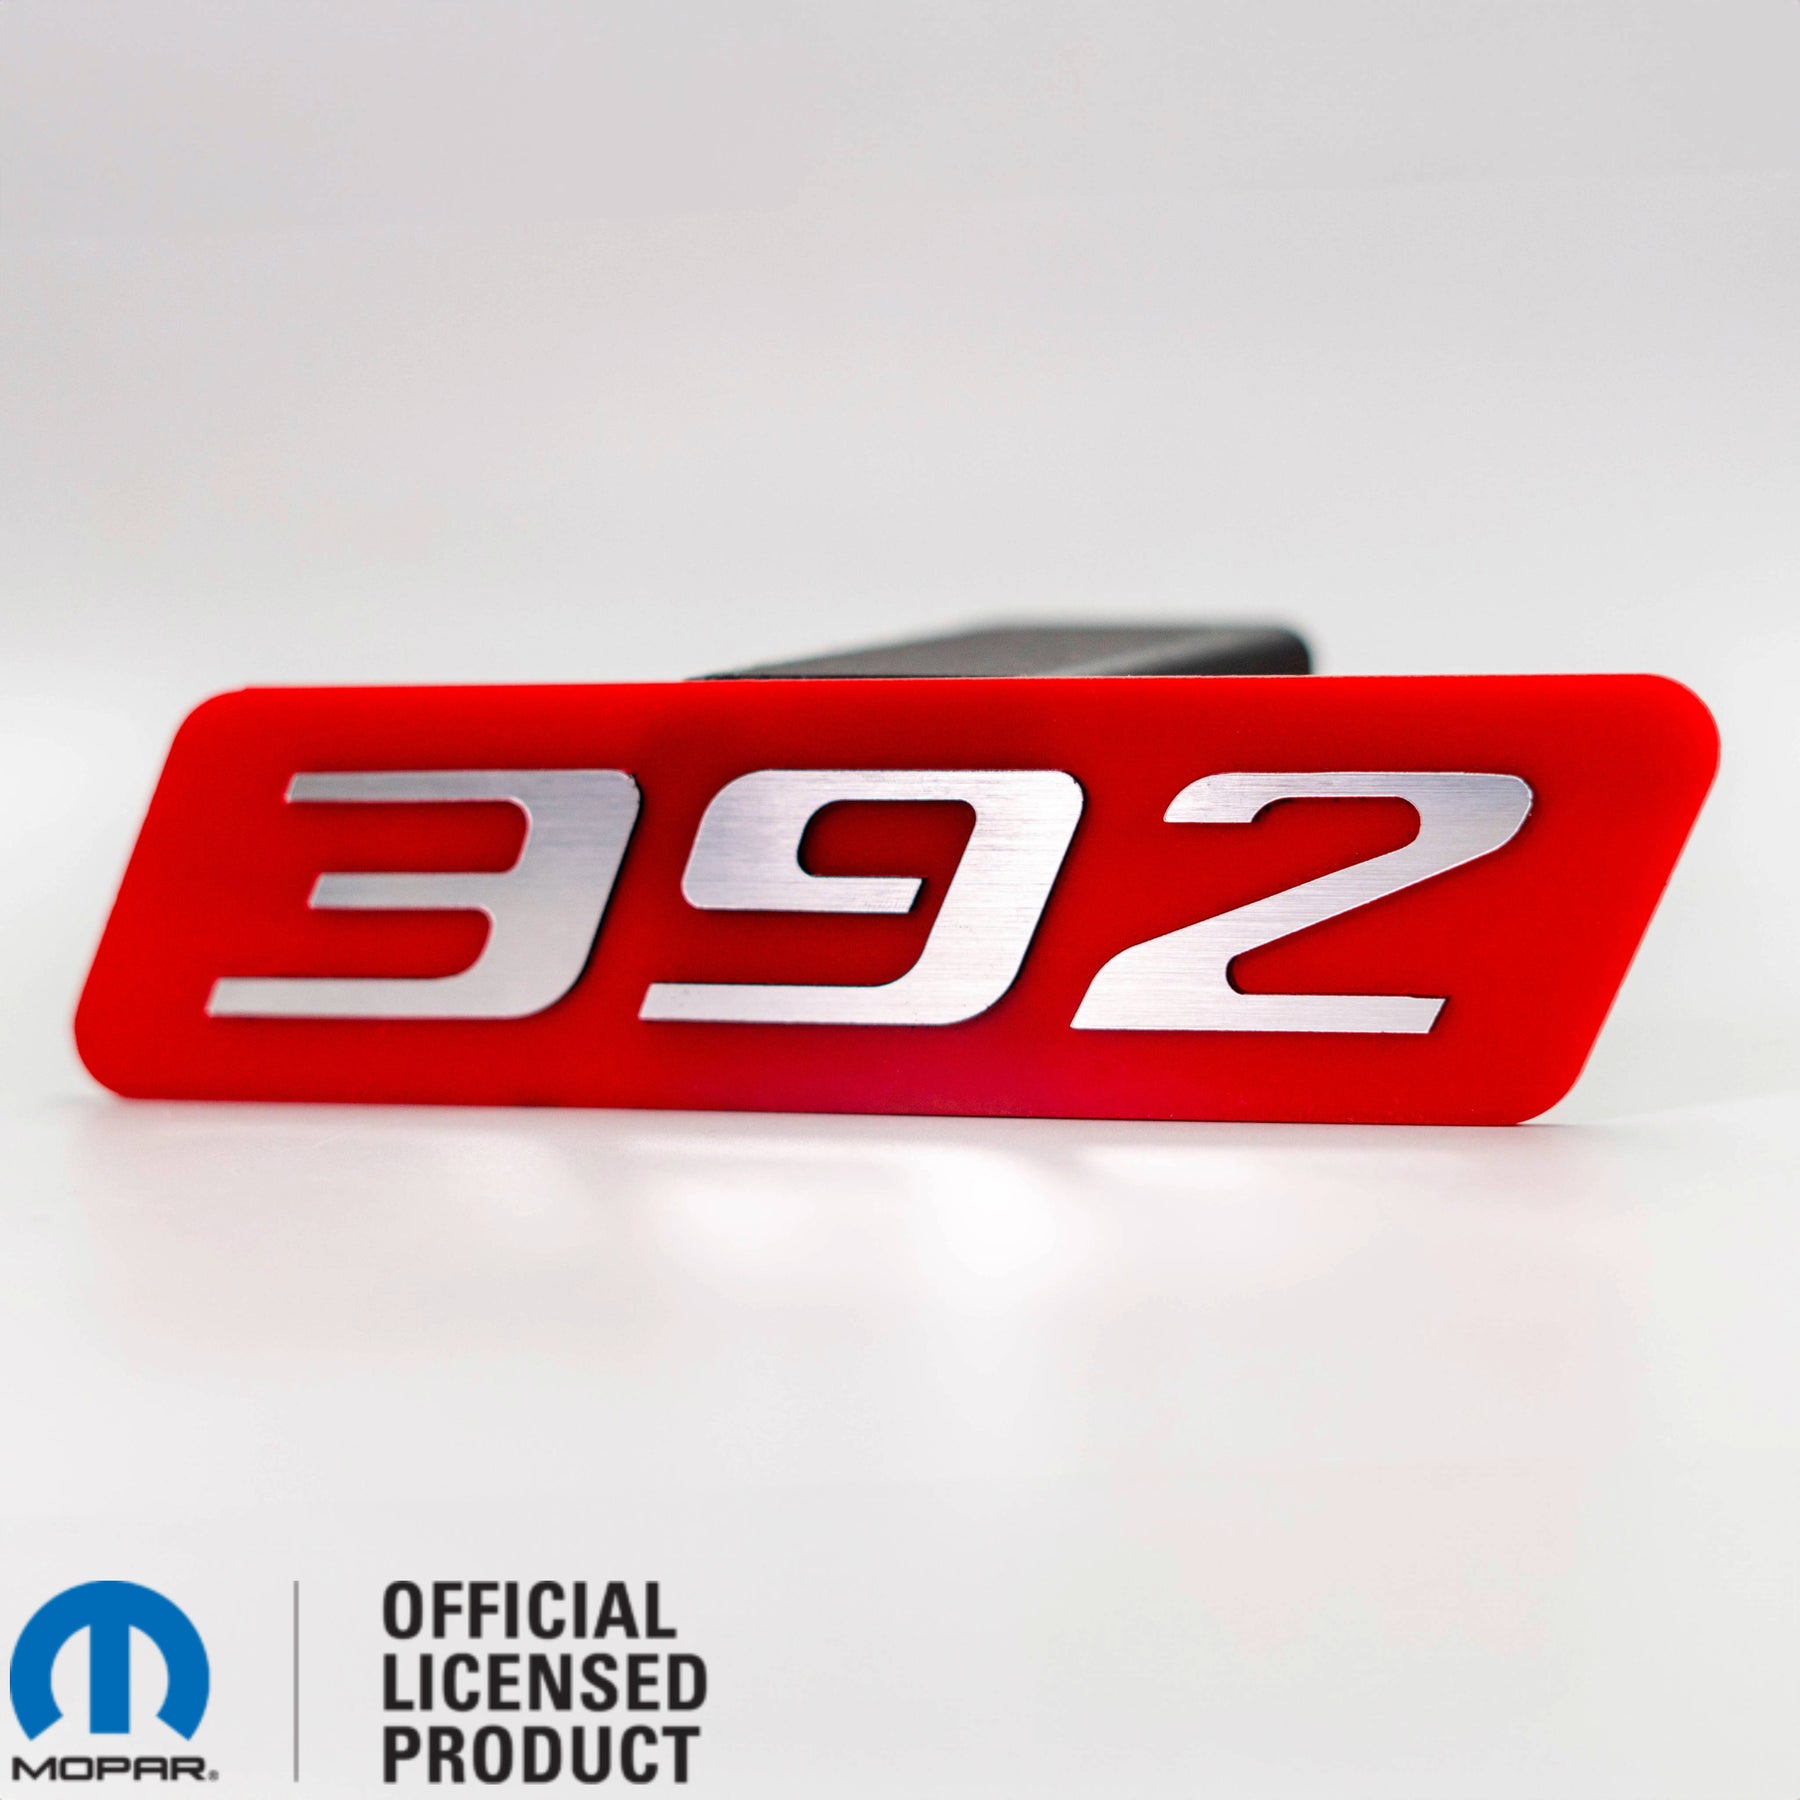 392® - HITCH COVER - Officially Licensed Product